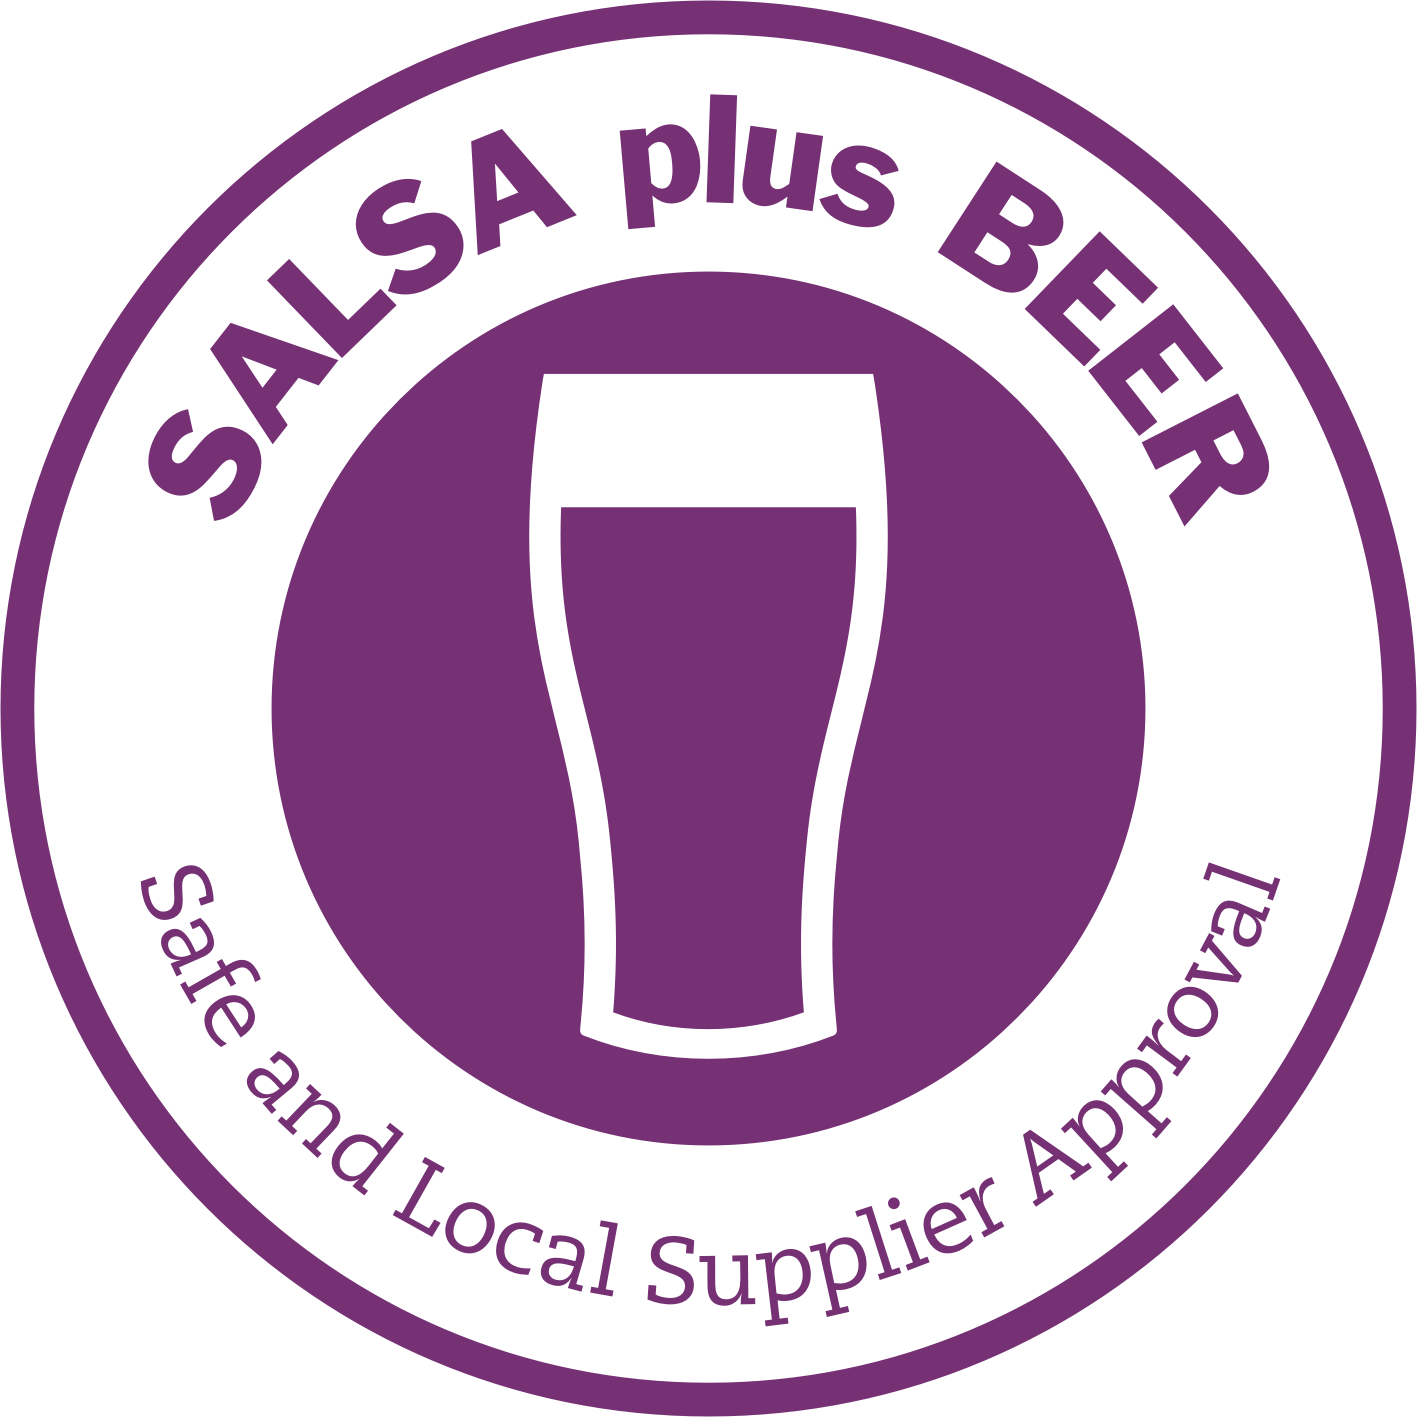 SALSA plus BEER. Safe and Local Supplier Approval